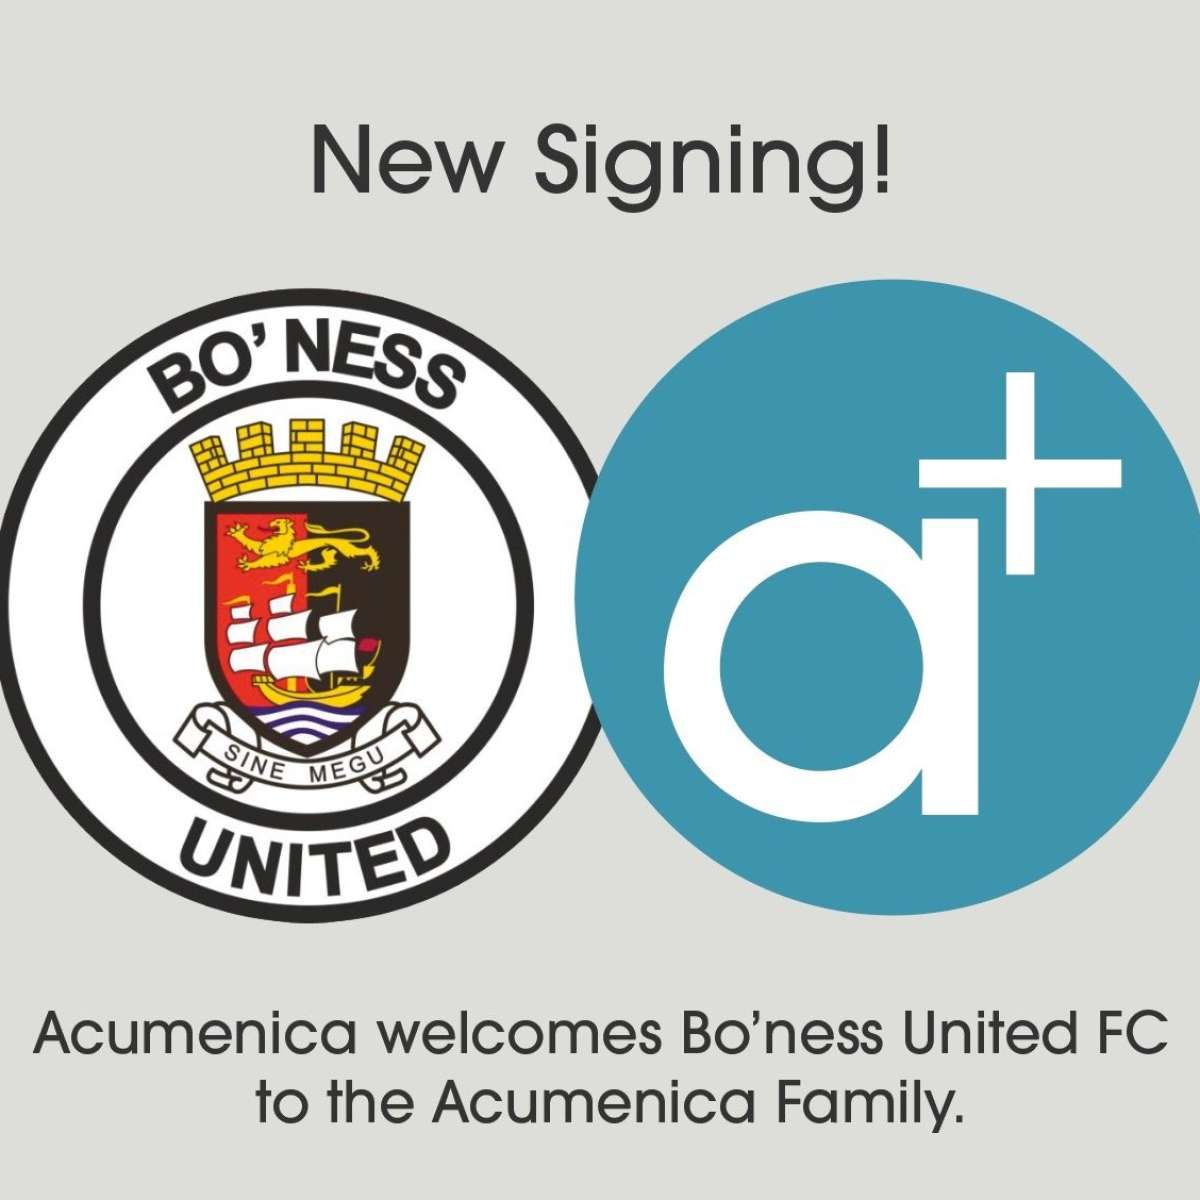 New signing for Acumenica and United